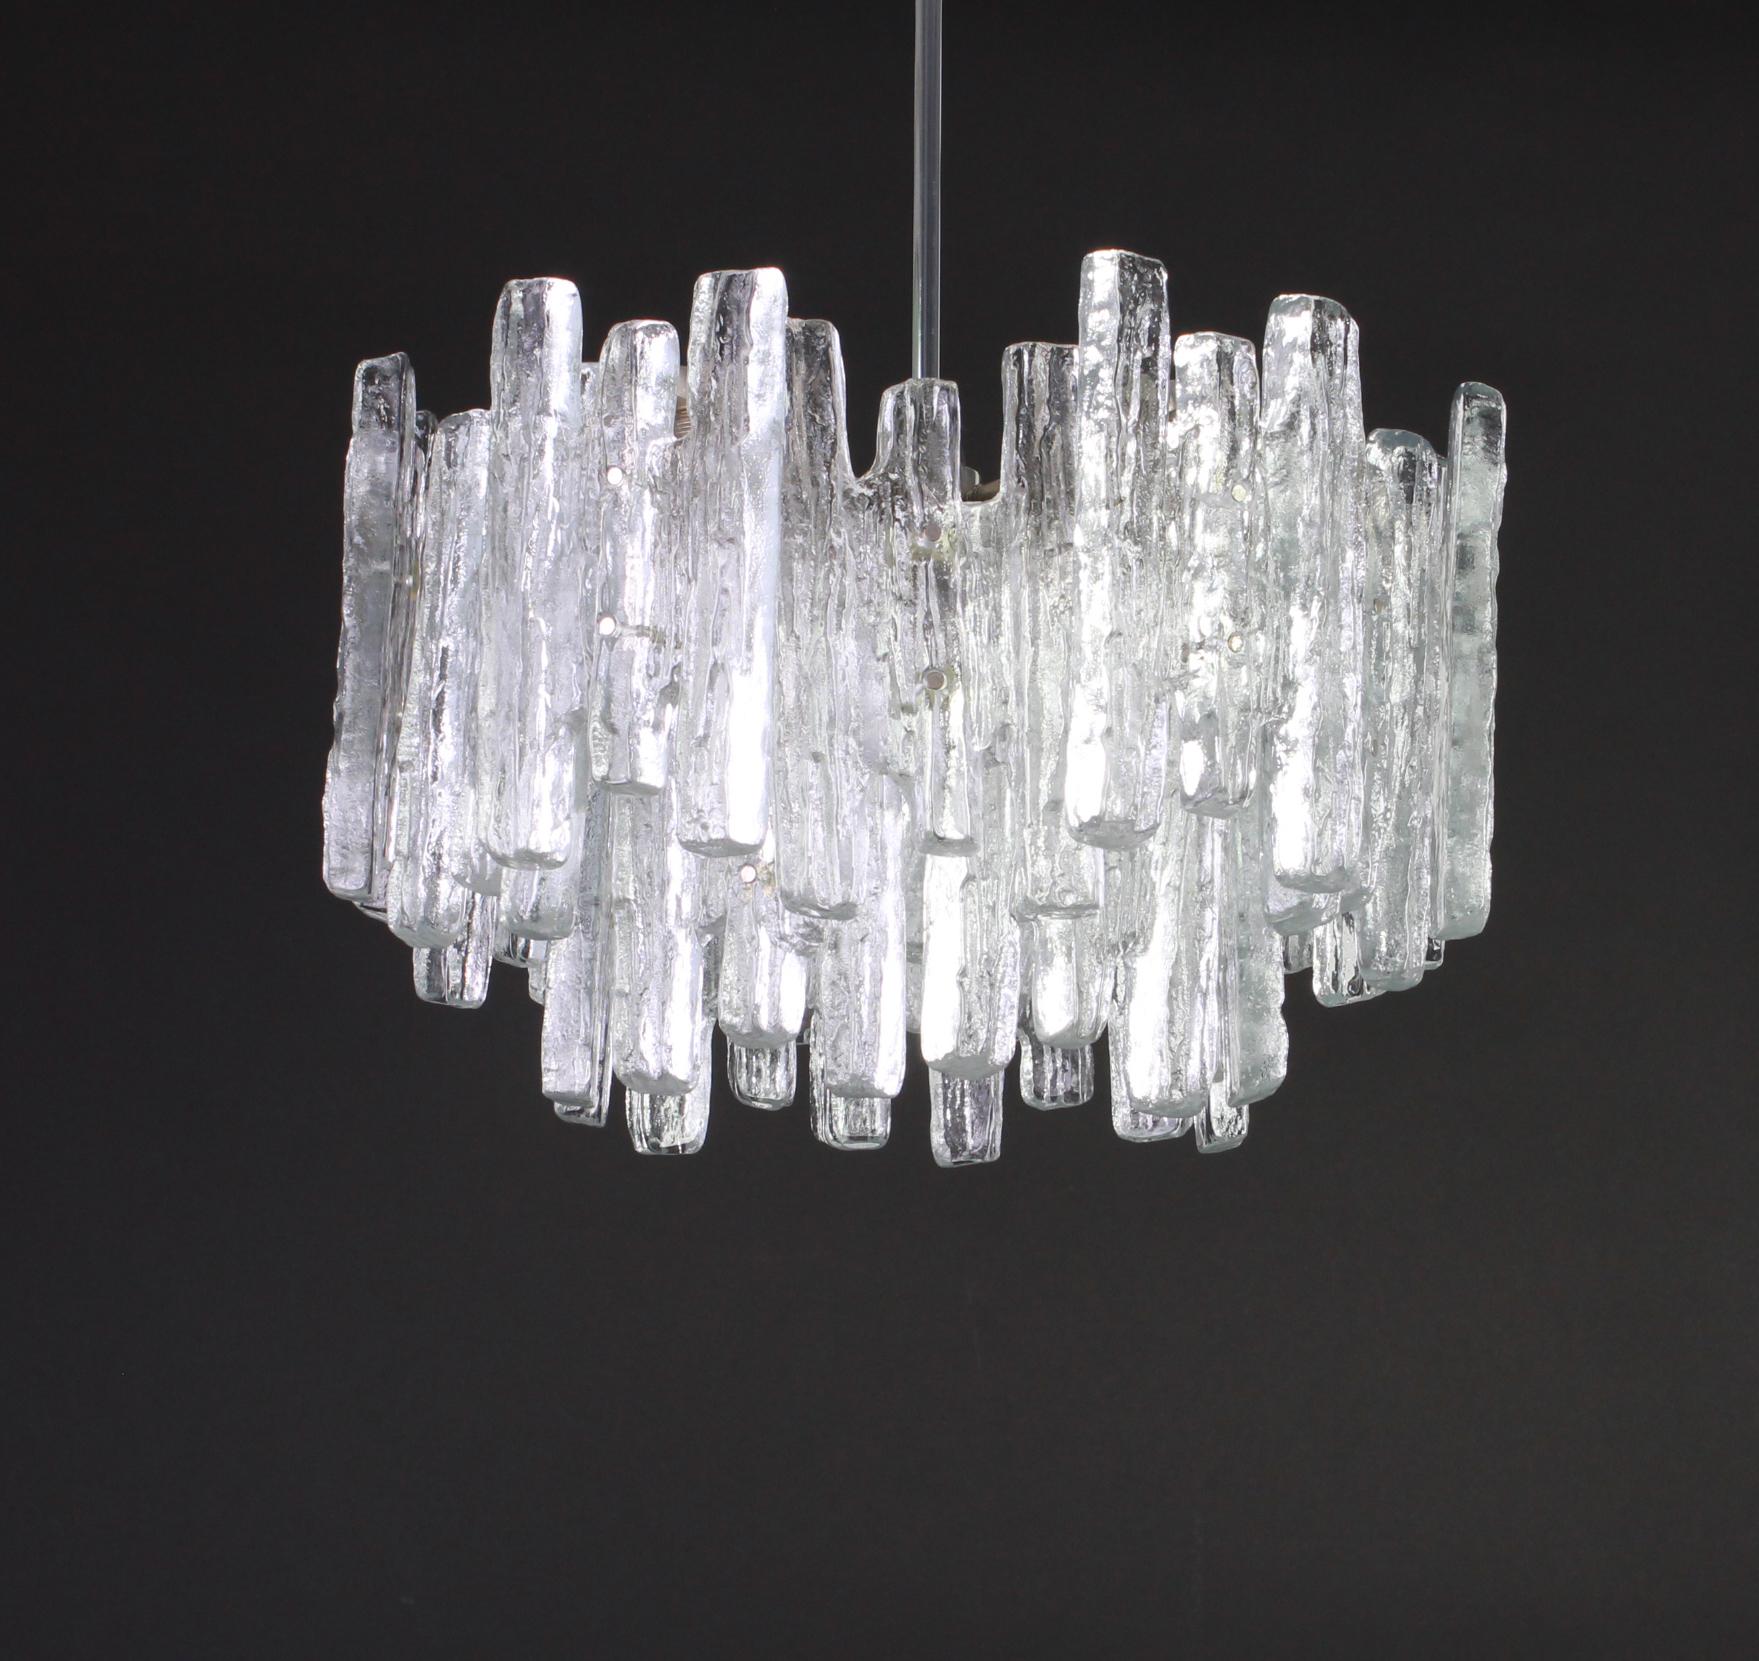 1 of 2 Large Rare Murano Ice Glass Chandelier by Kalmar, Austria, 1960s For Sale 1